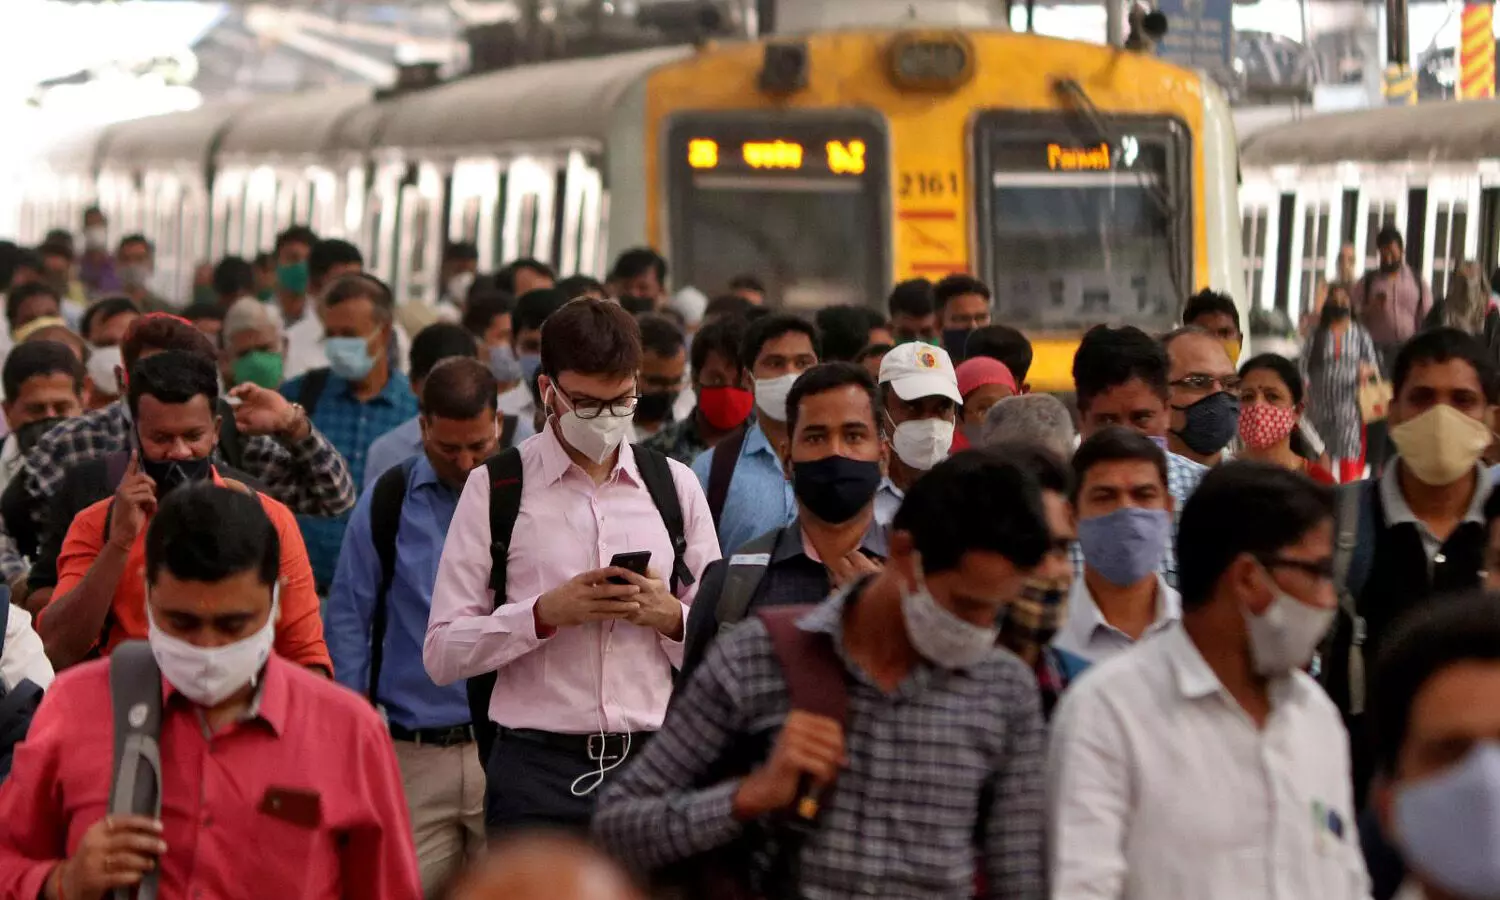 Mumbai: 14 lakh people fined for not wearing masks in public during second wave